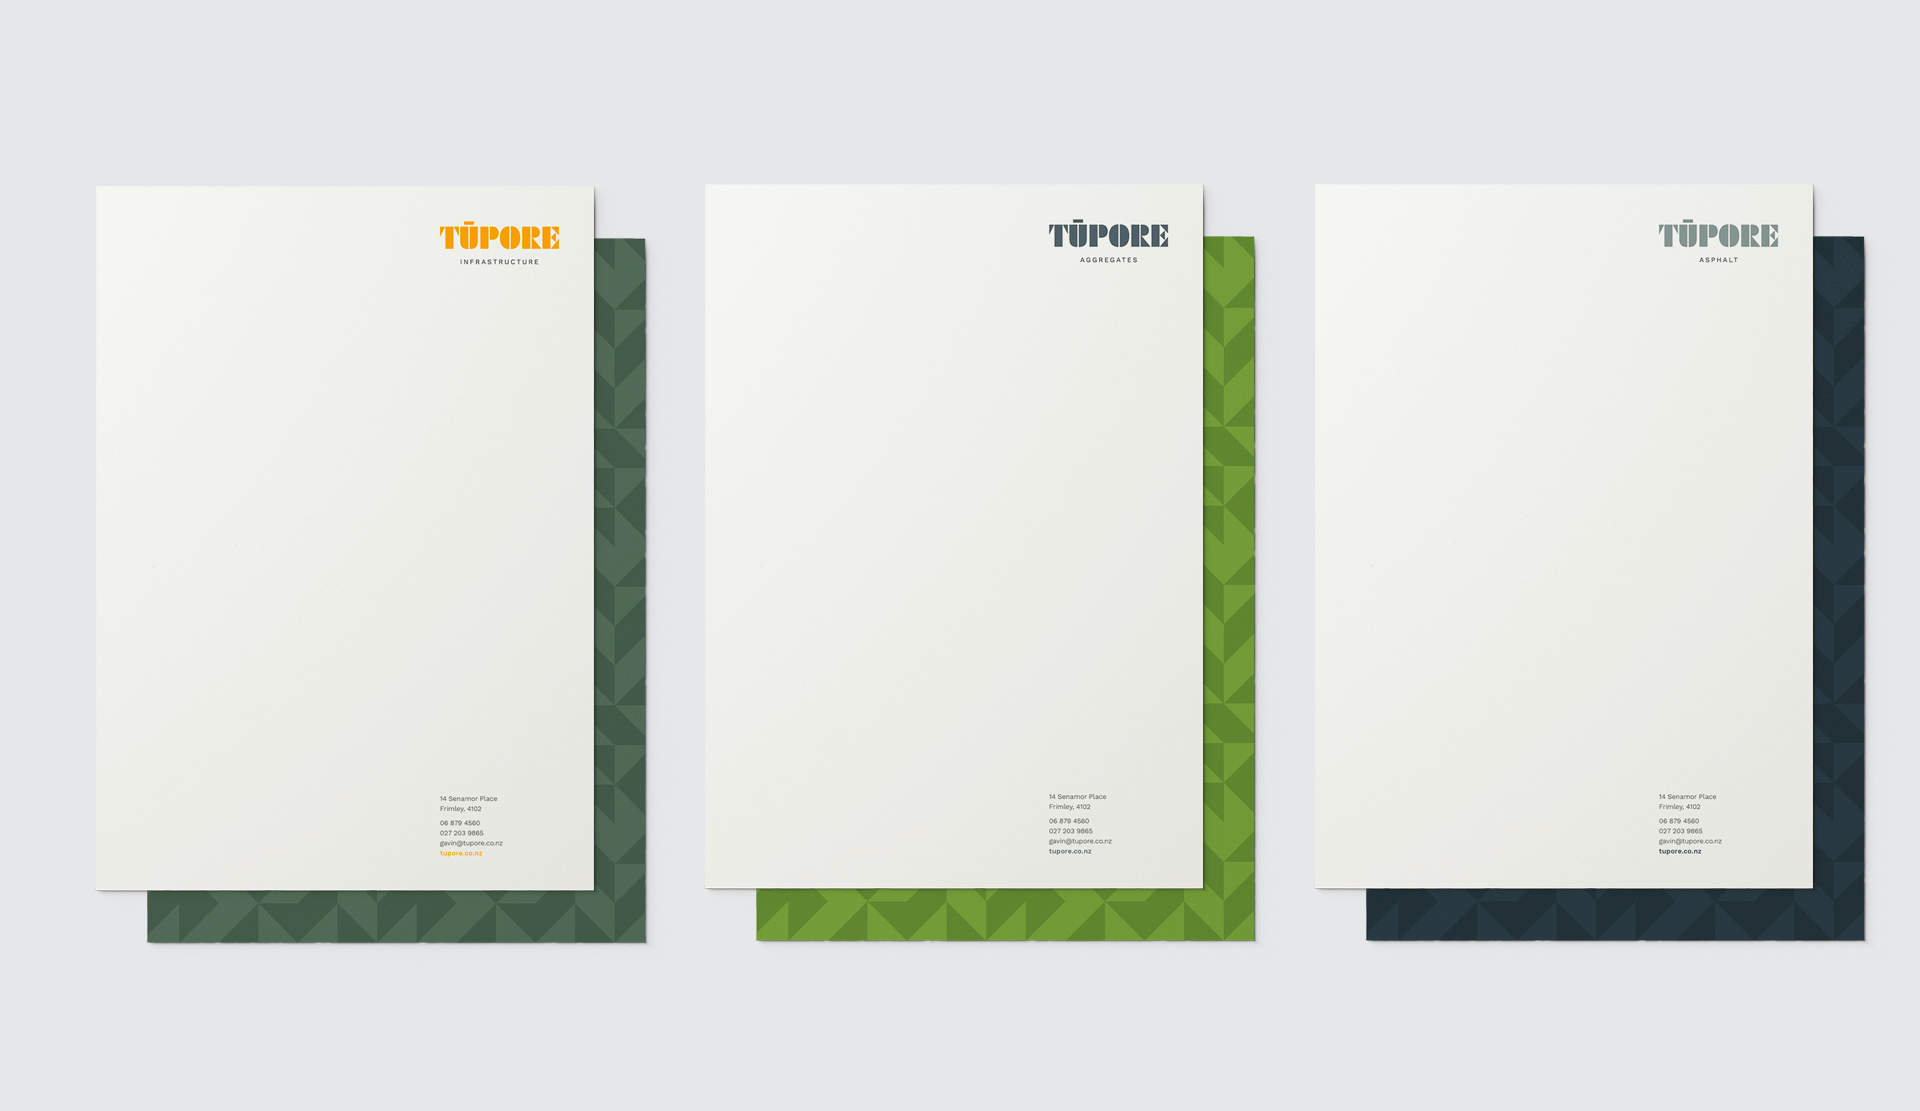 Many-Hats-Tupore-infrastructure-letterhead-design